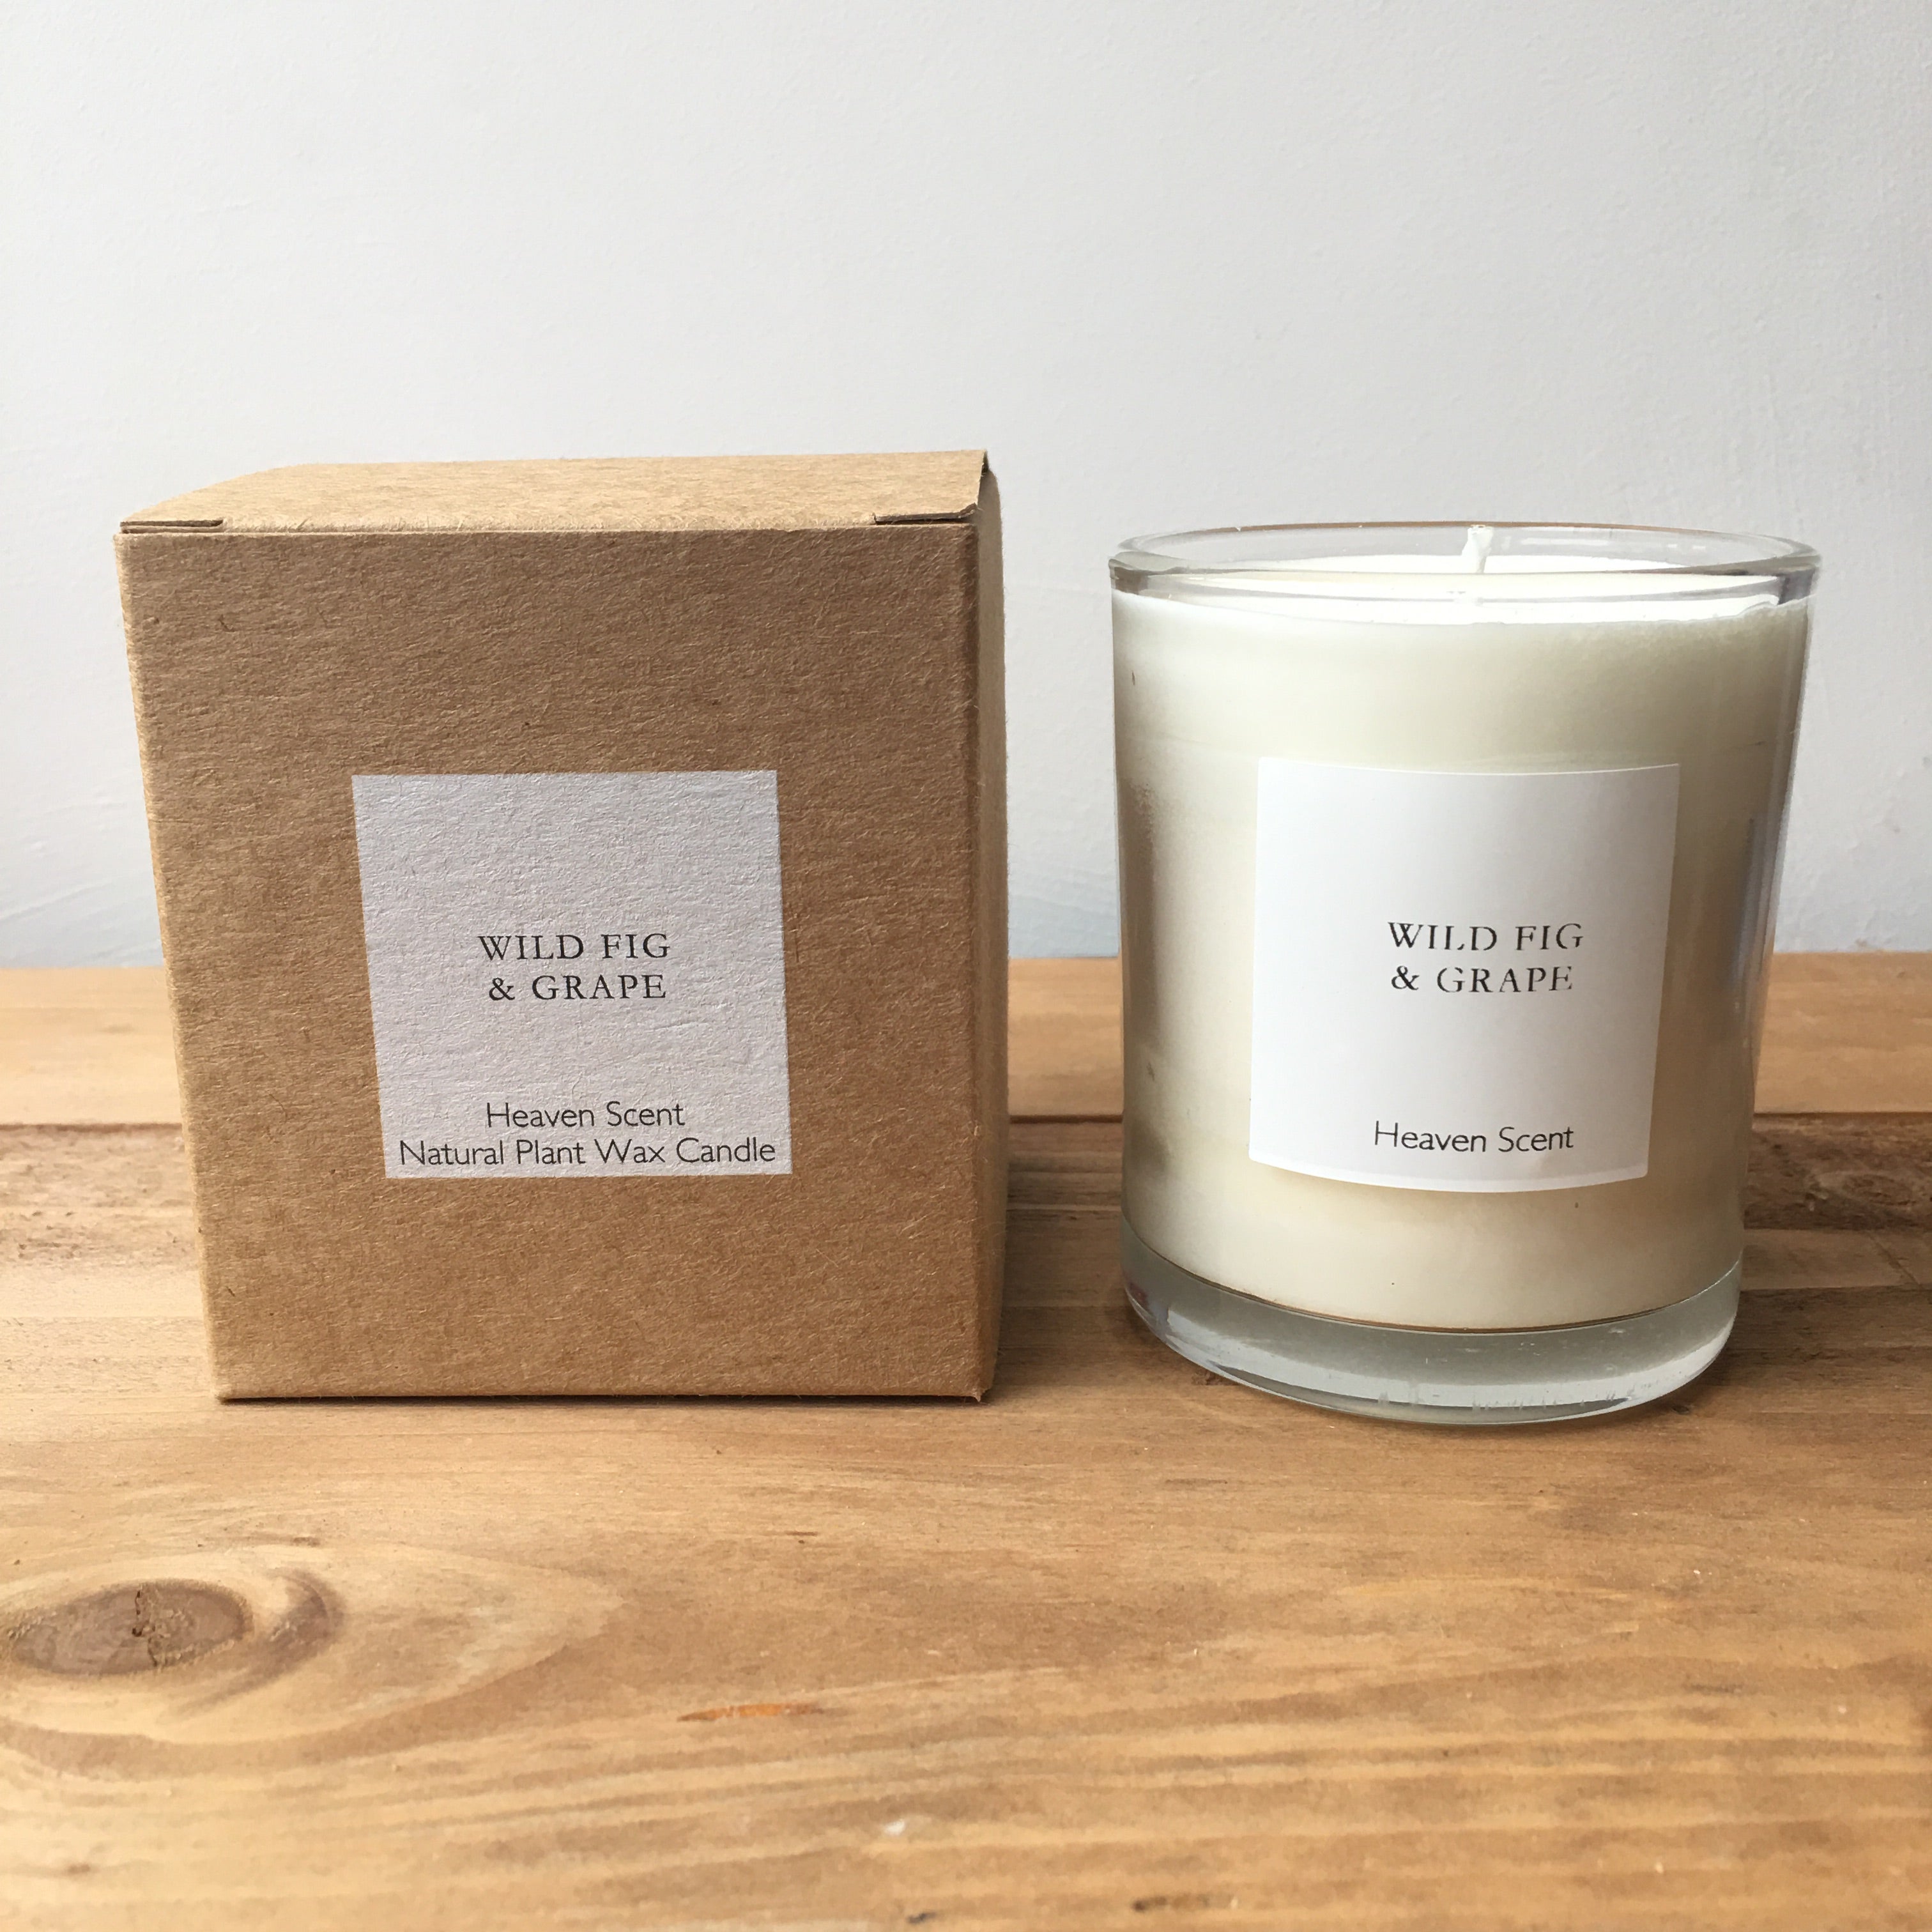 VEGAN SCENTED SOY WAX, ESSENTIAL OIL CANDLES 9CL 30 HOUR BURN